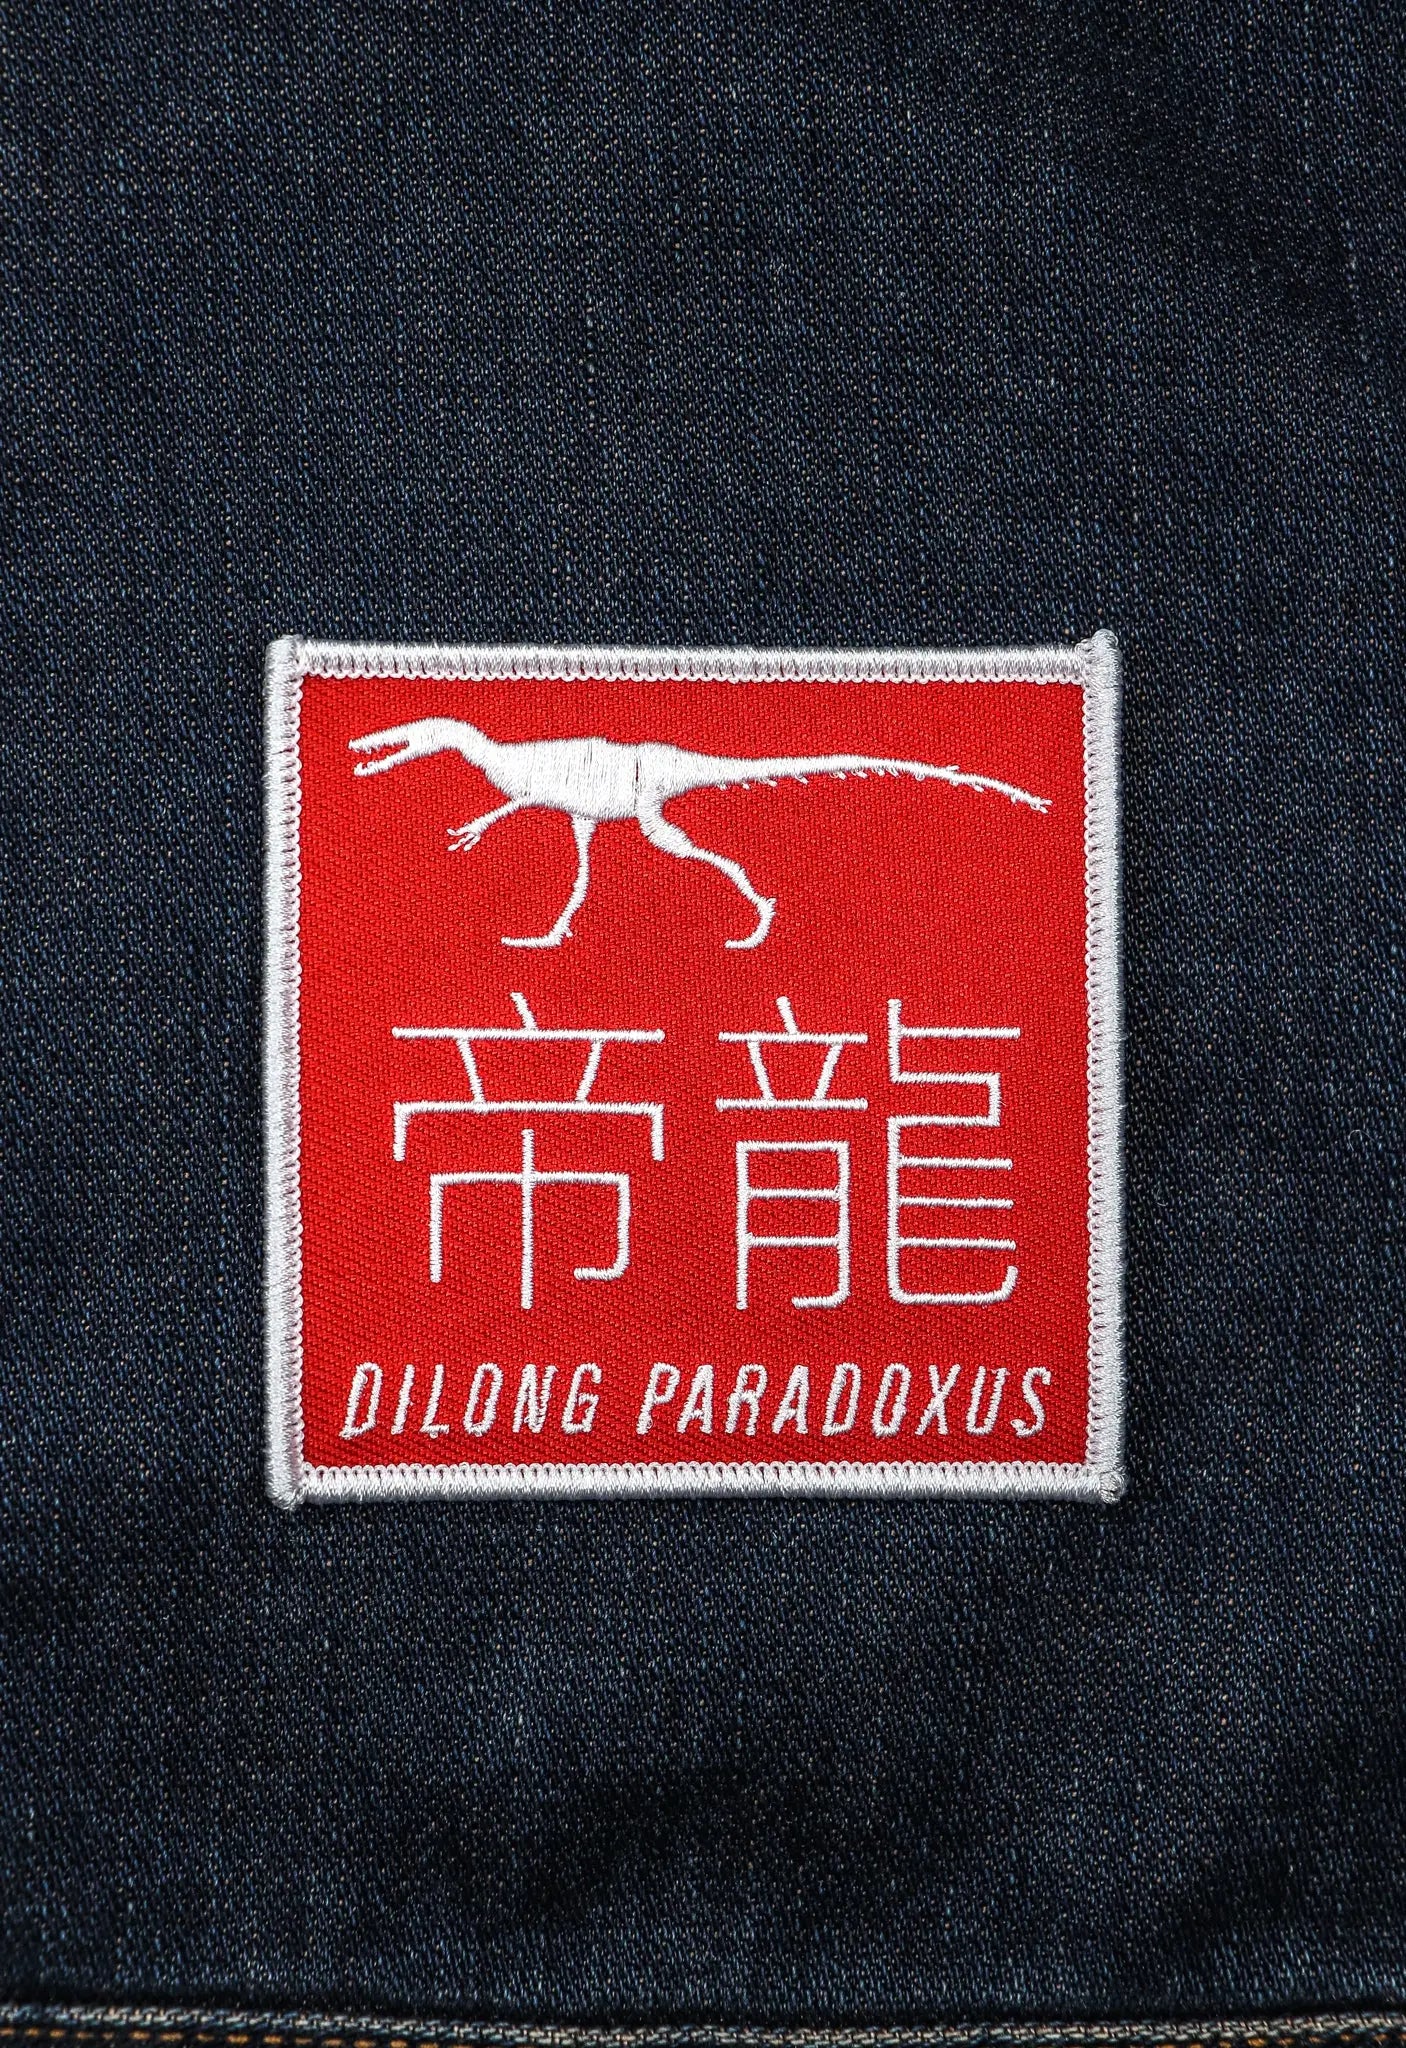 Dilong Paradoxus Dinosaur Patch - THE STEMCELL SCIENCE SHOP